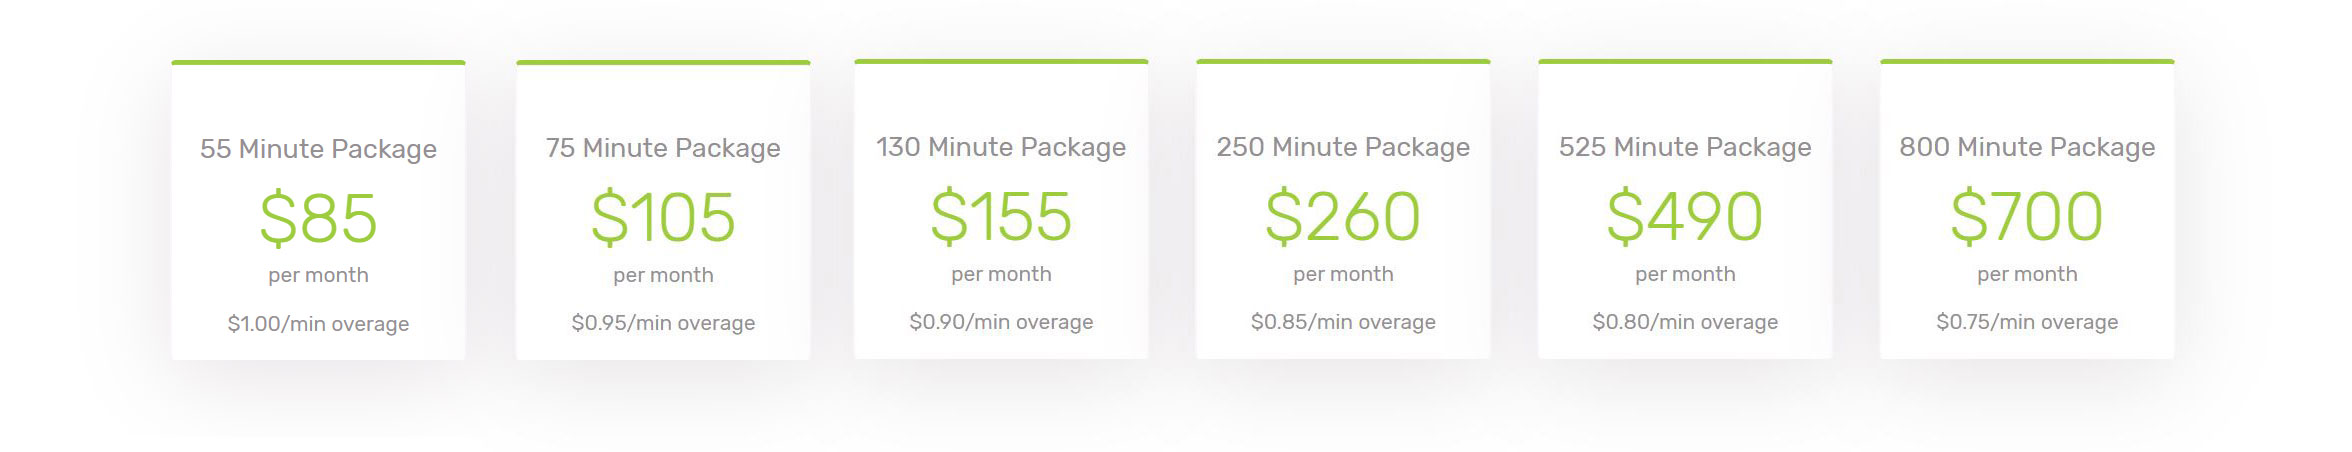 Answering Service Pricing Plans